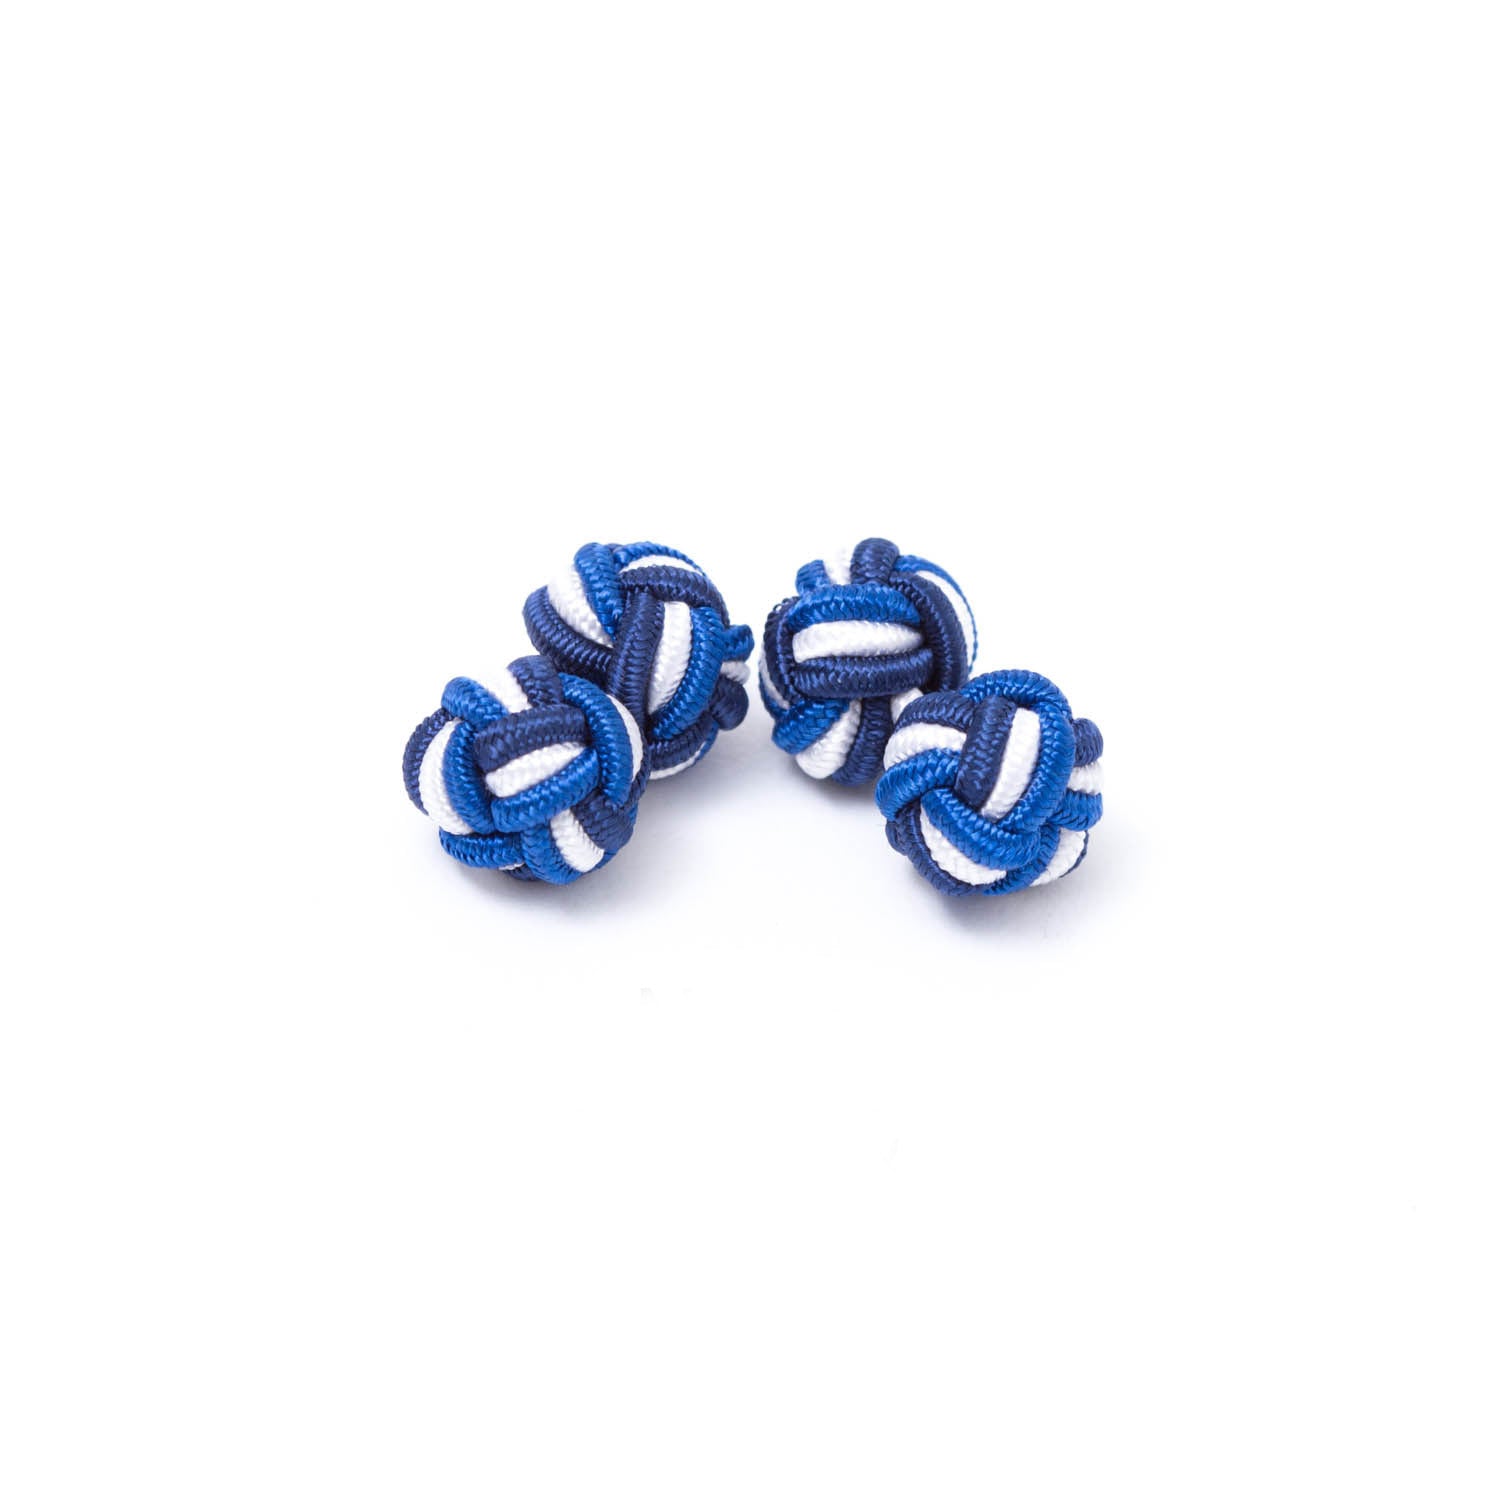 Three Tri-Colored Knot Cufflinks from KirbyAllison.com on a white surface.